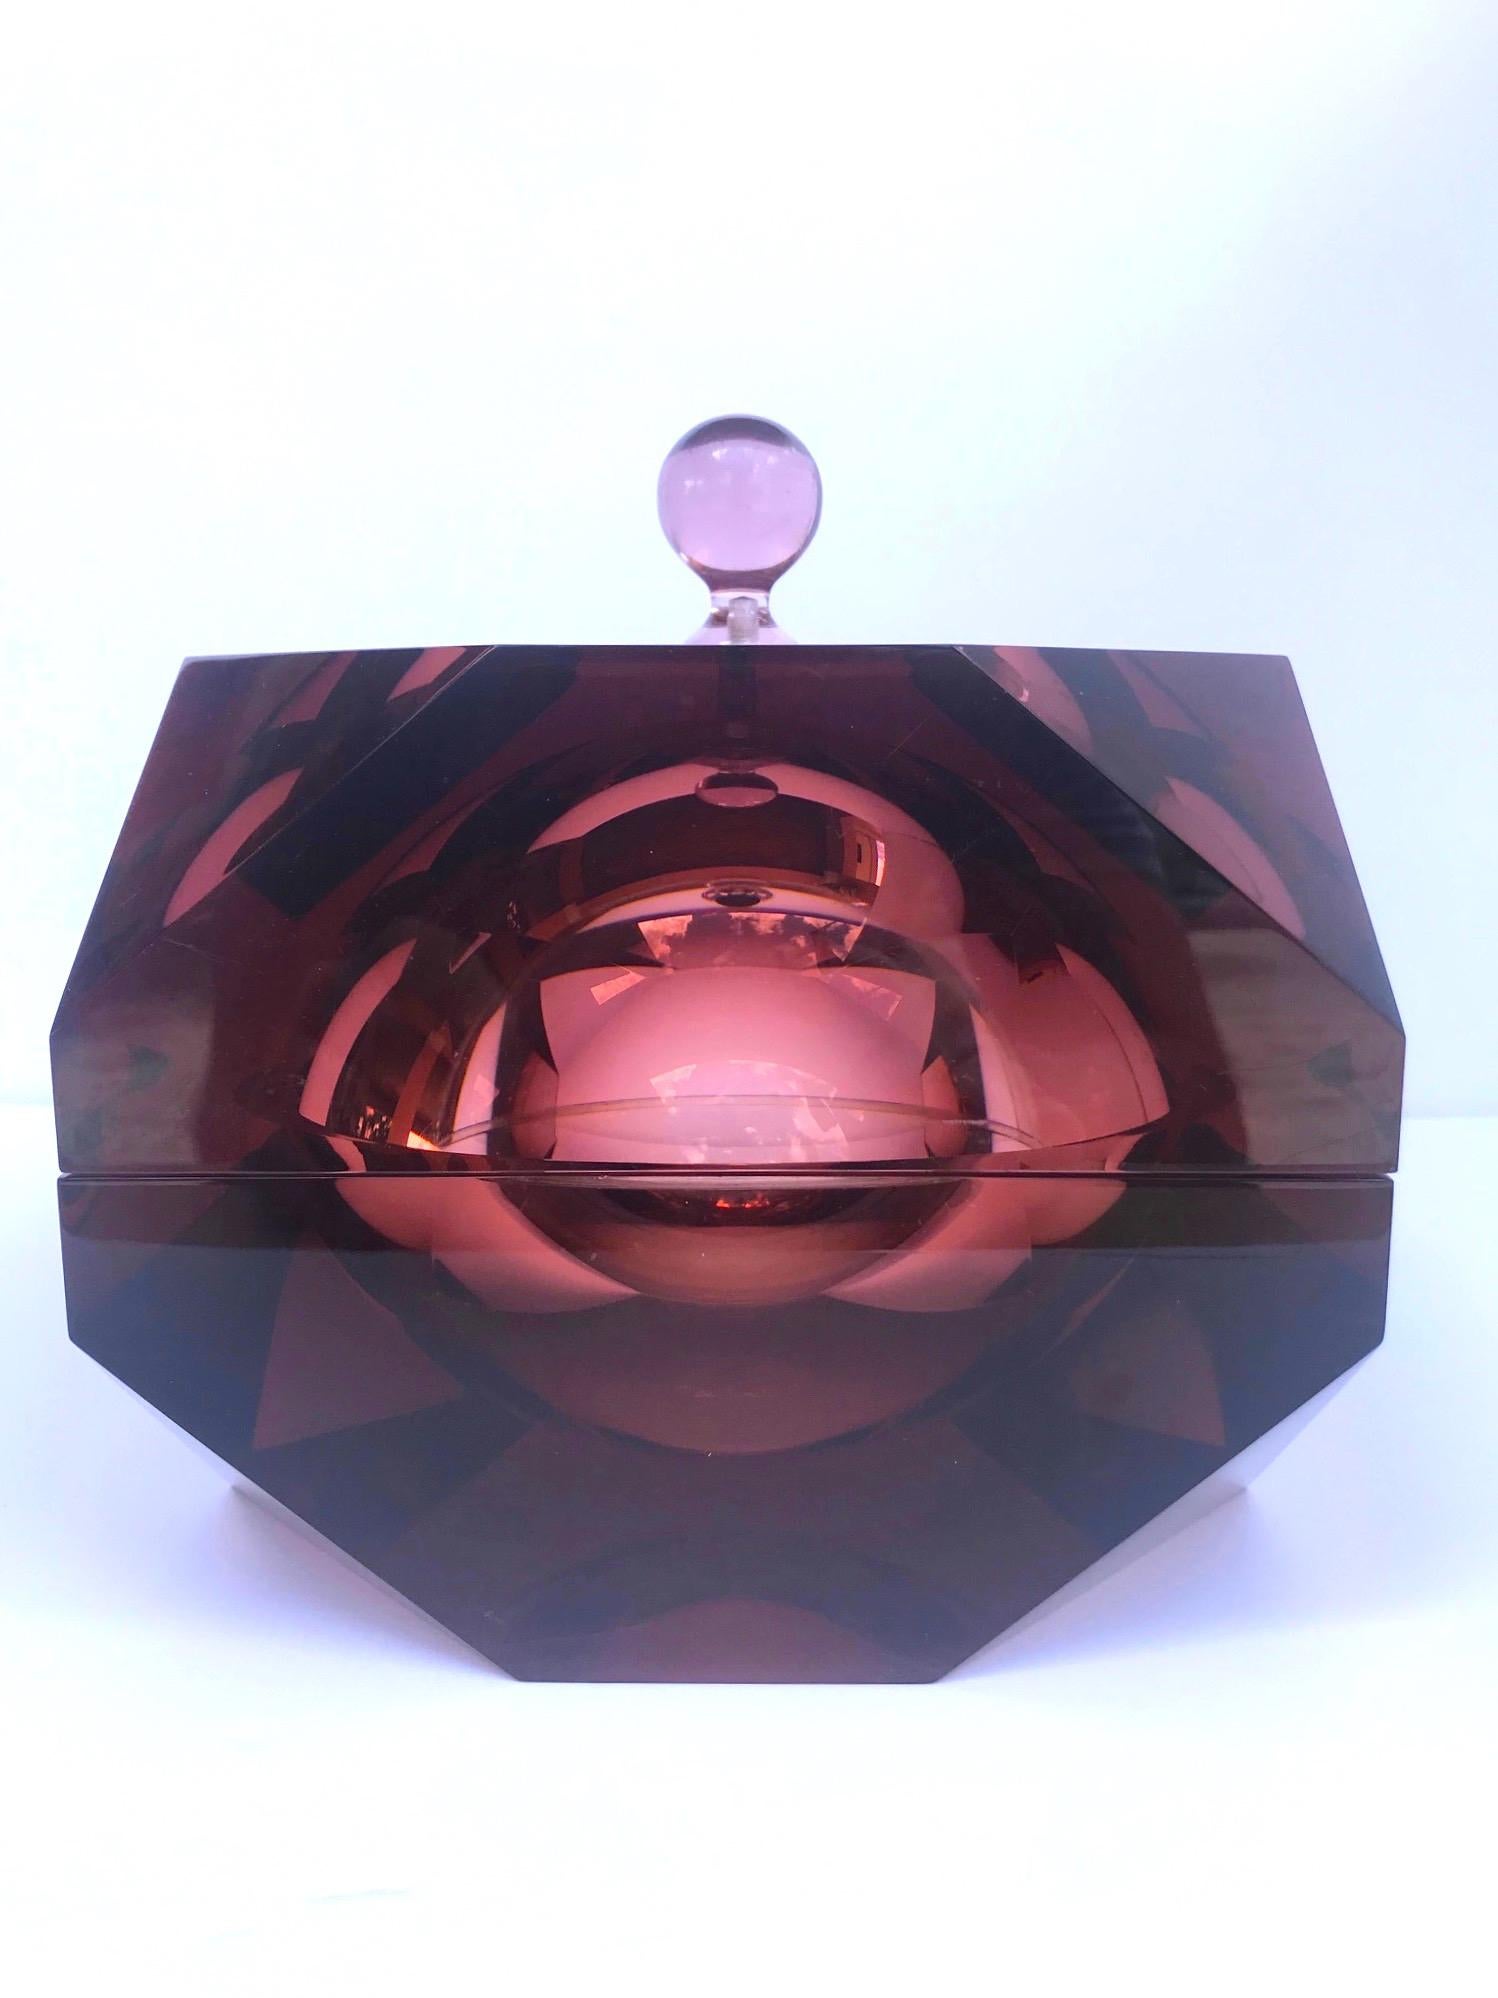 Exceptional Mid-Century Modern ice bucket with unique purple amethyst color. Carved from a solid Lucite block, the ice bucket has faceted prism design resembling a precious stone or a diamond. Interior sphere illuminates and reflects surrounding